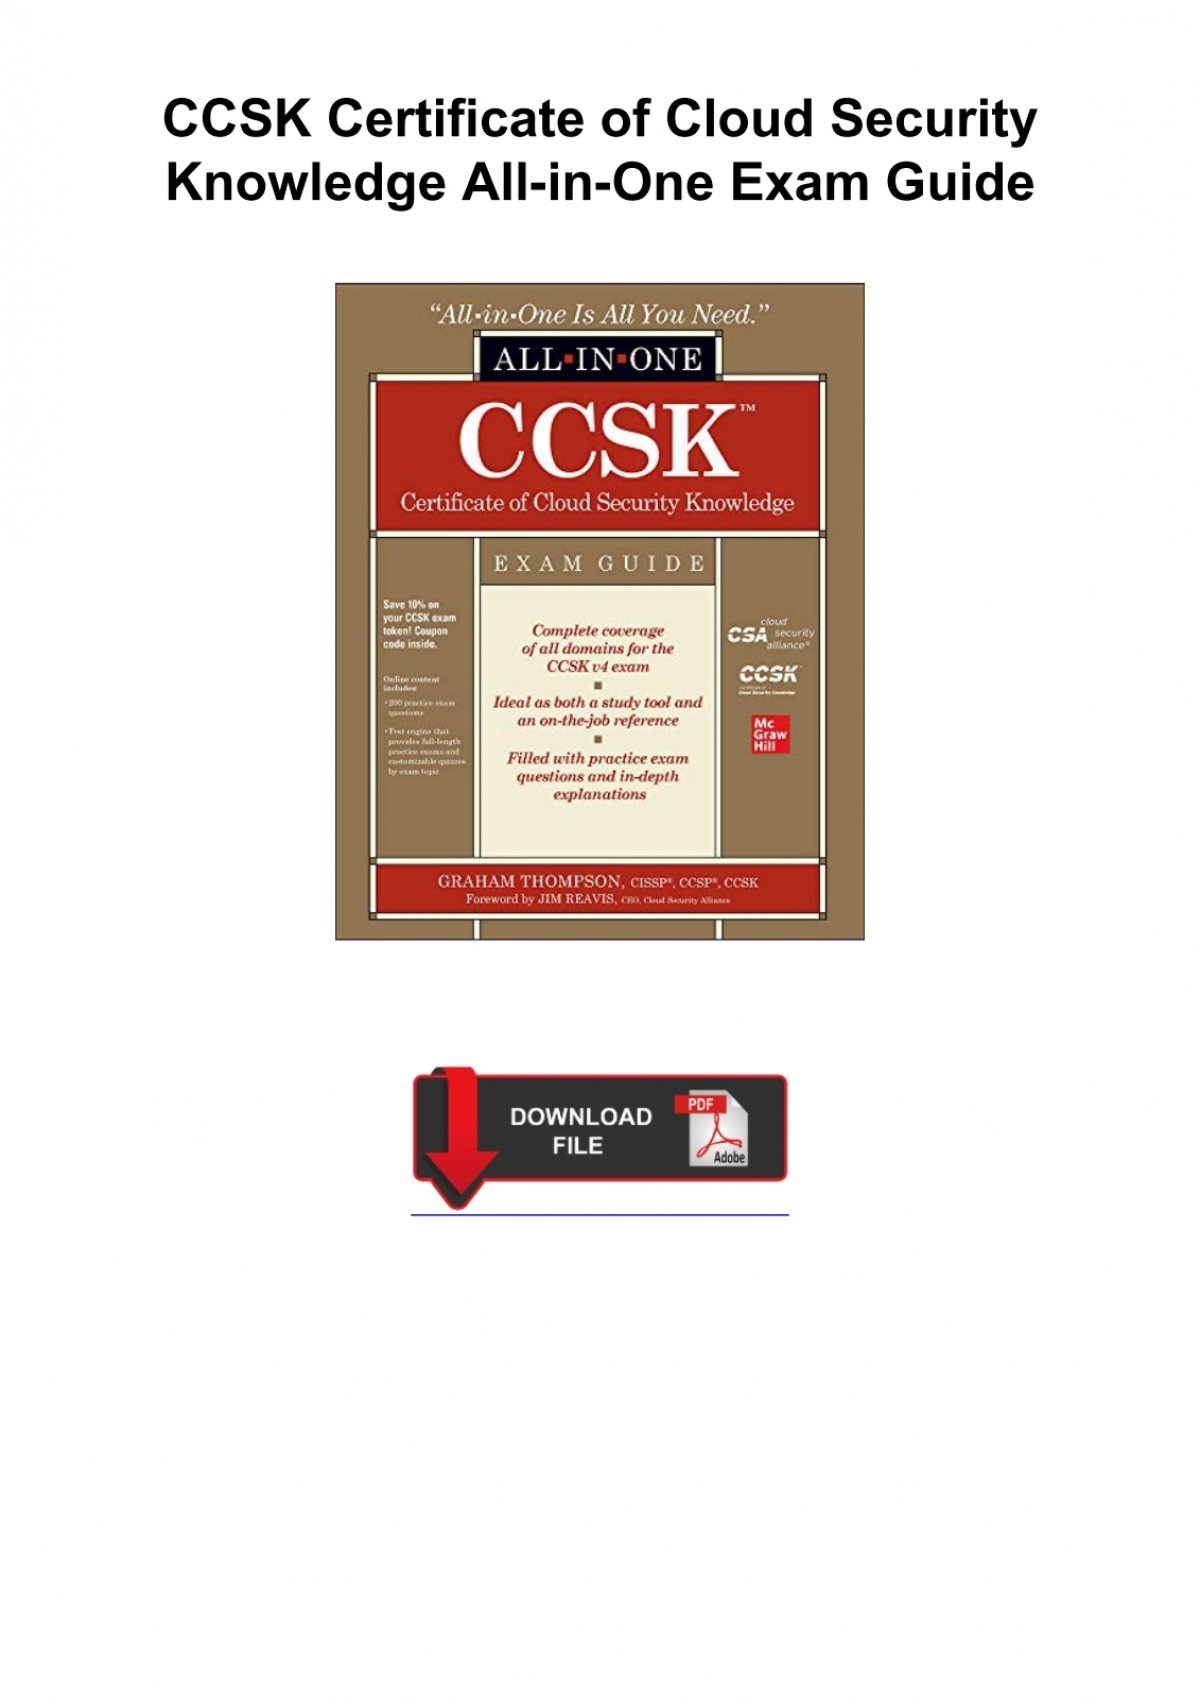 PDF/BOOK CCSK Certificate of Cloud Security Knowledge All in One Exam Guide